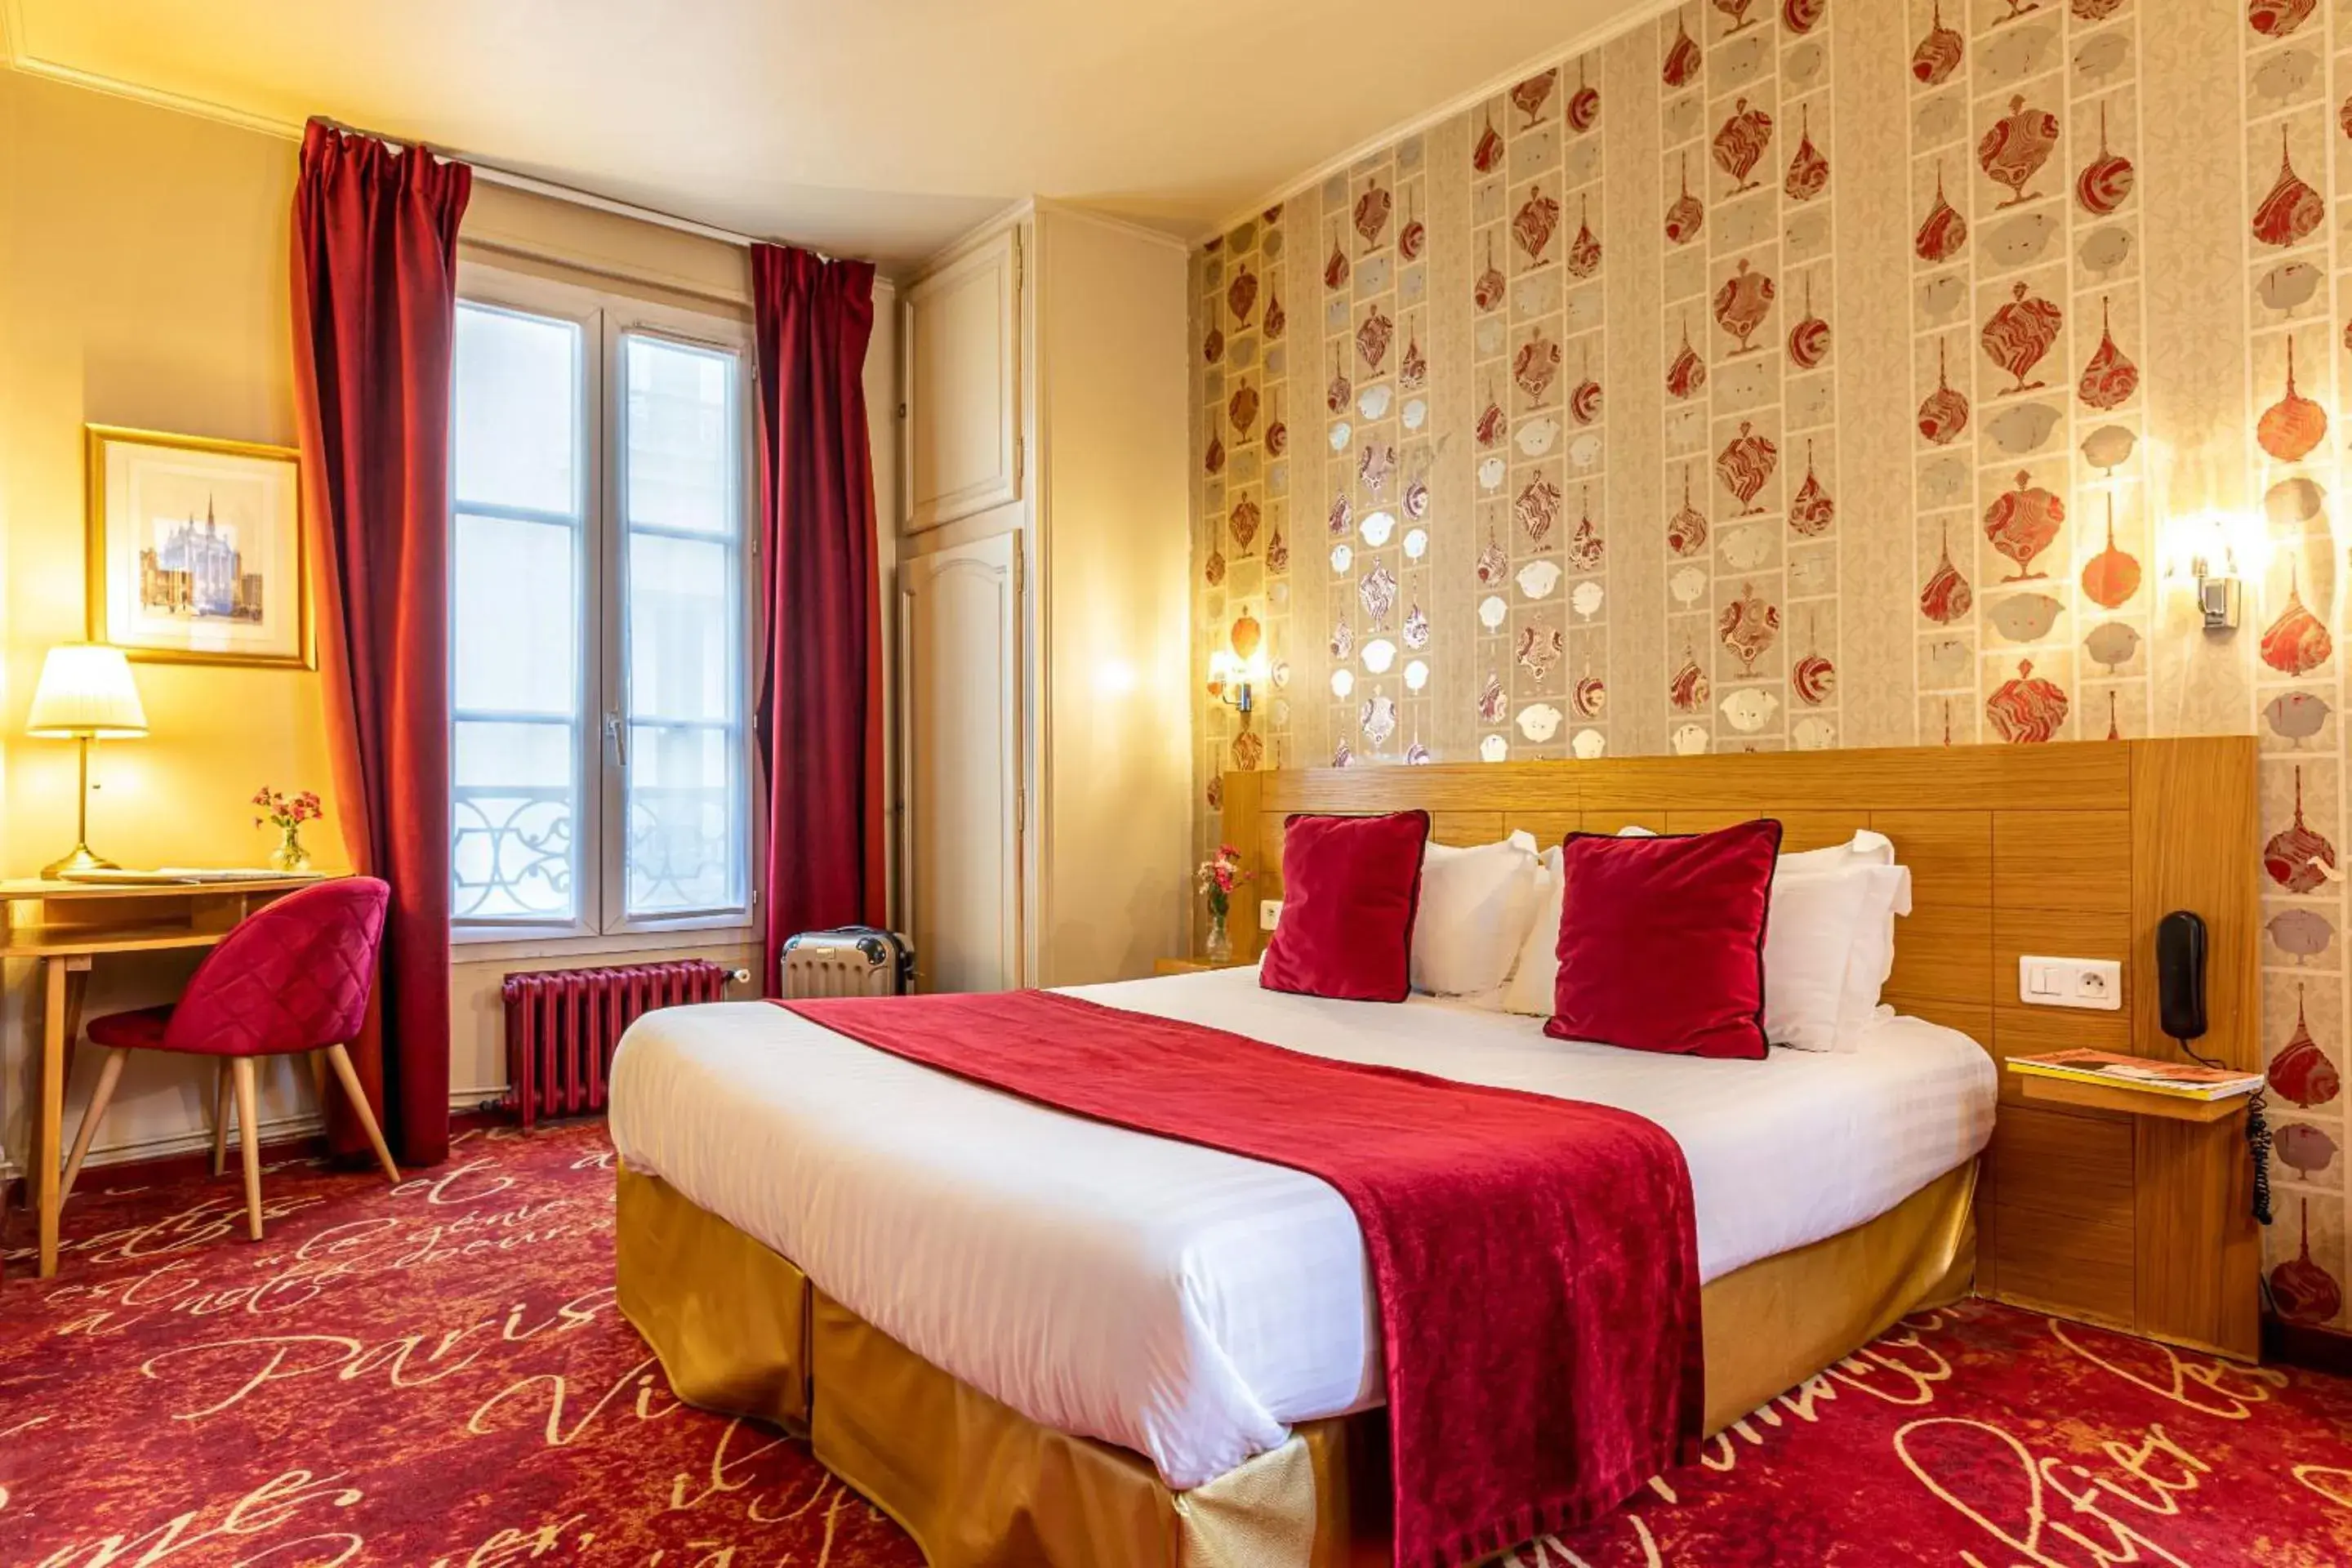 Bed in Romance Malesherbes by Patrick Hayat